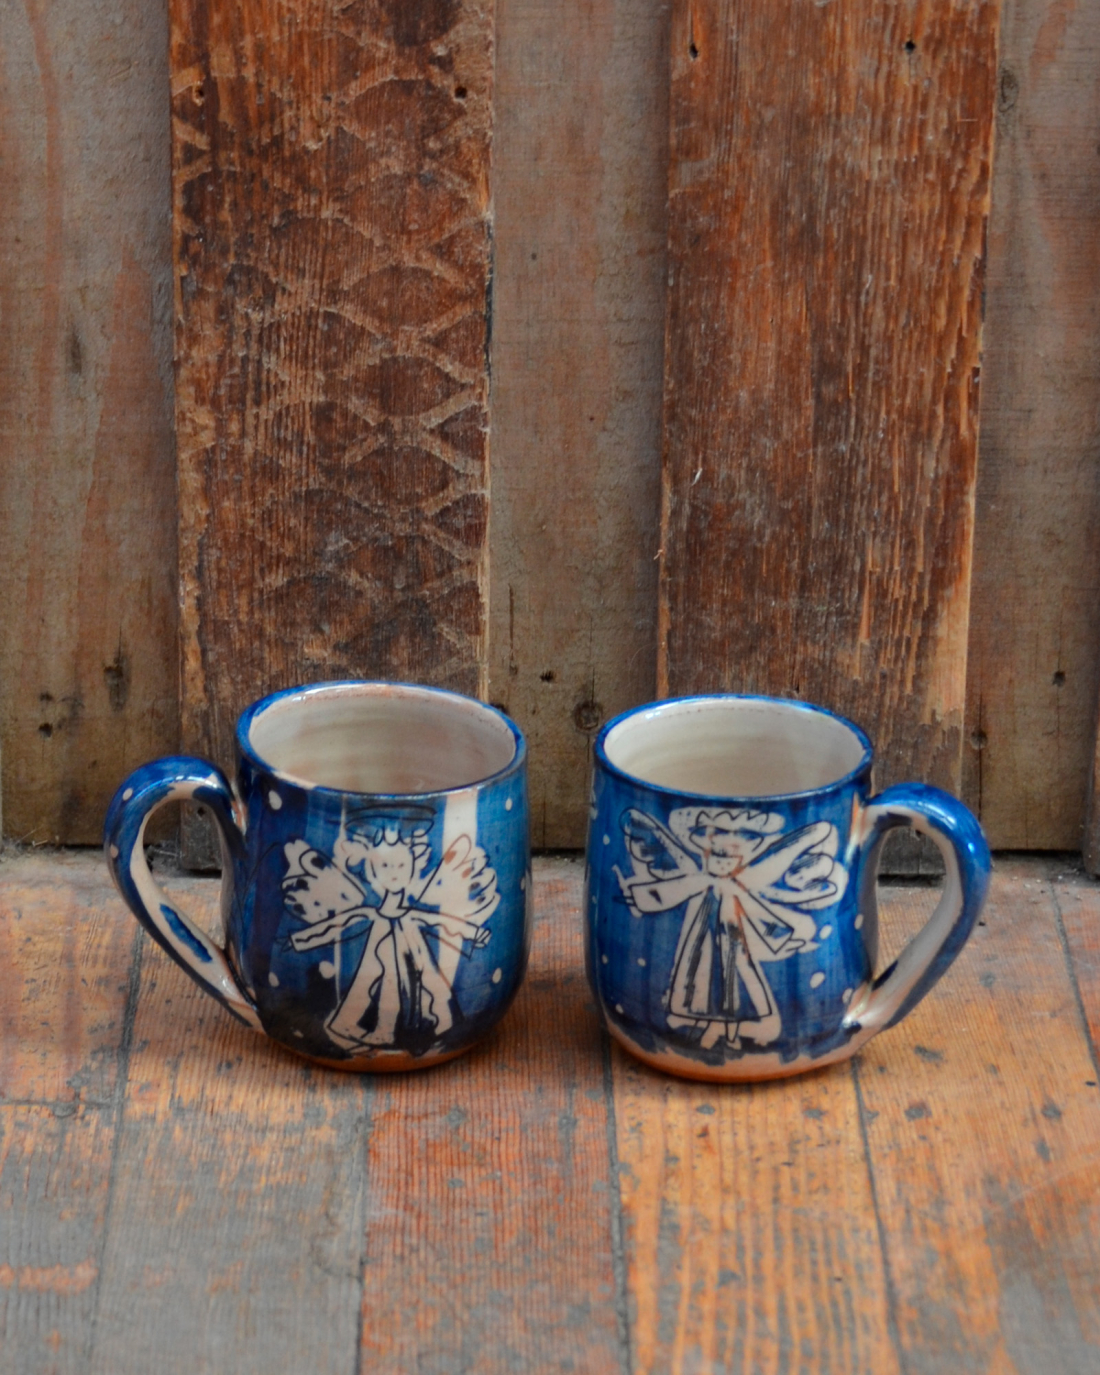 Sgraffito Tableware by Jim & Dominique Keeling